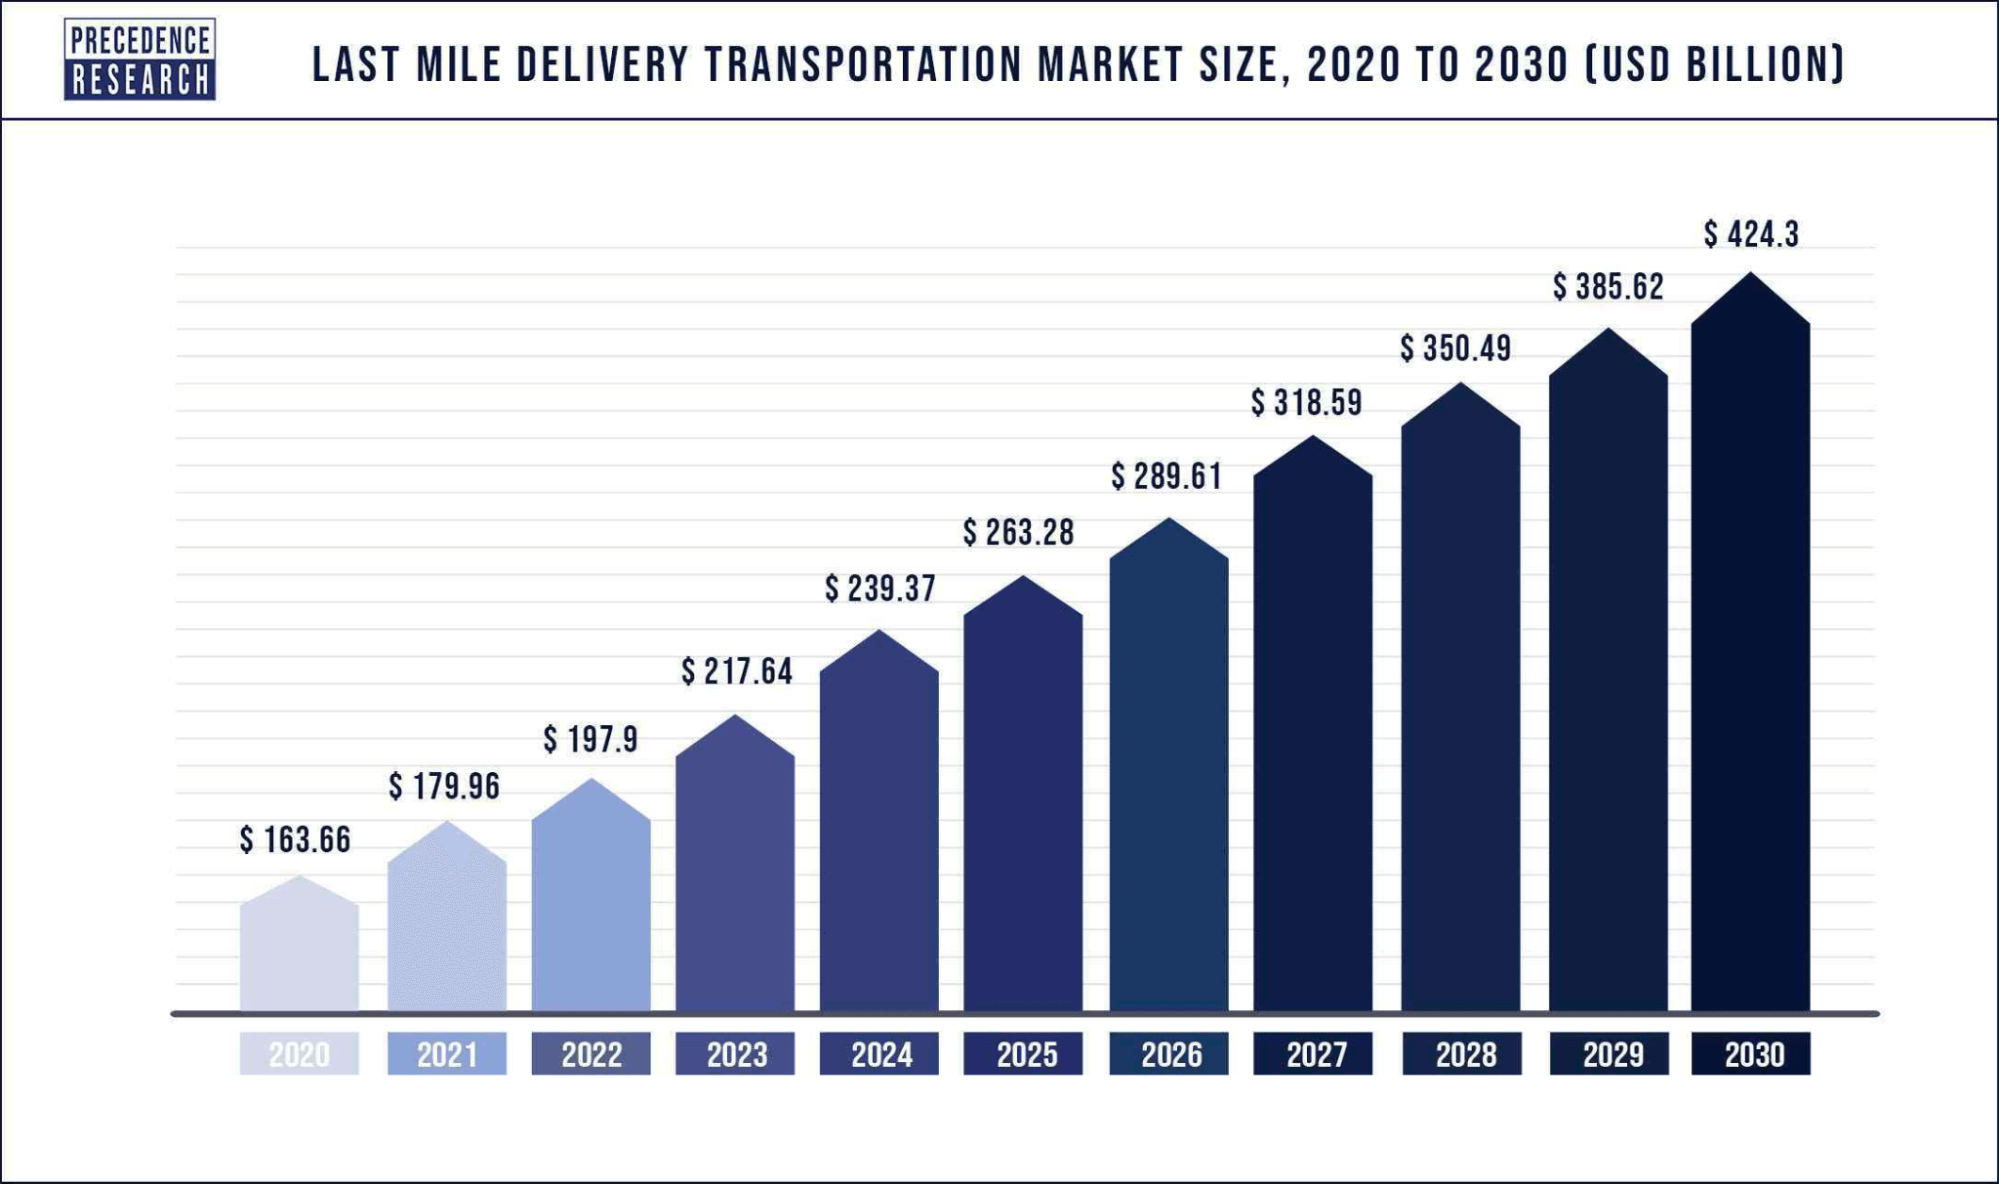 Bar graph showing trends in last mile delivery market size